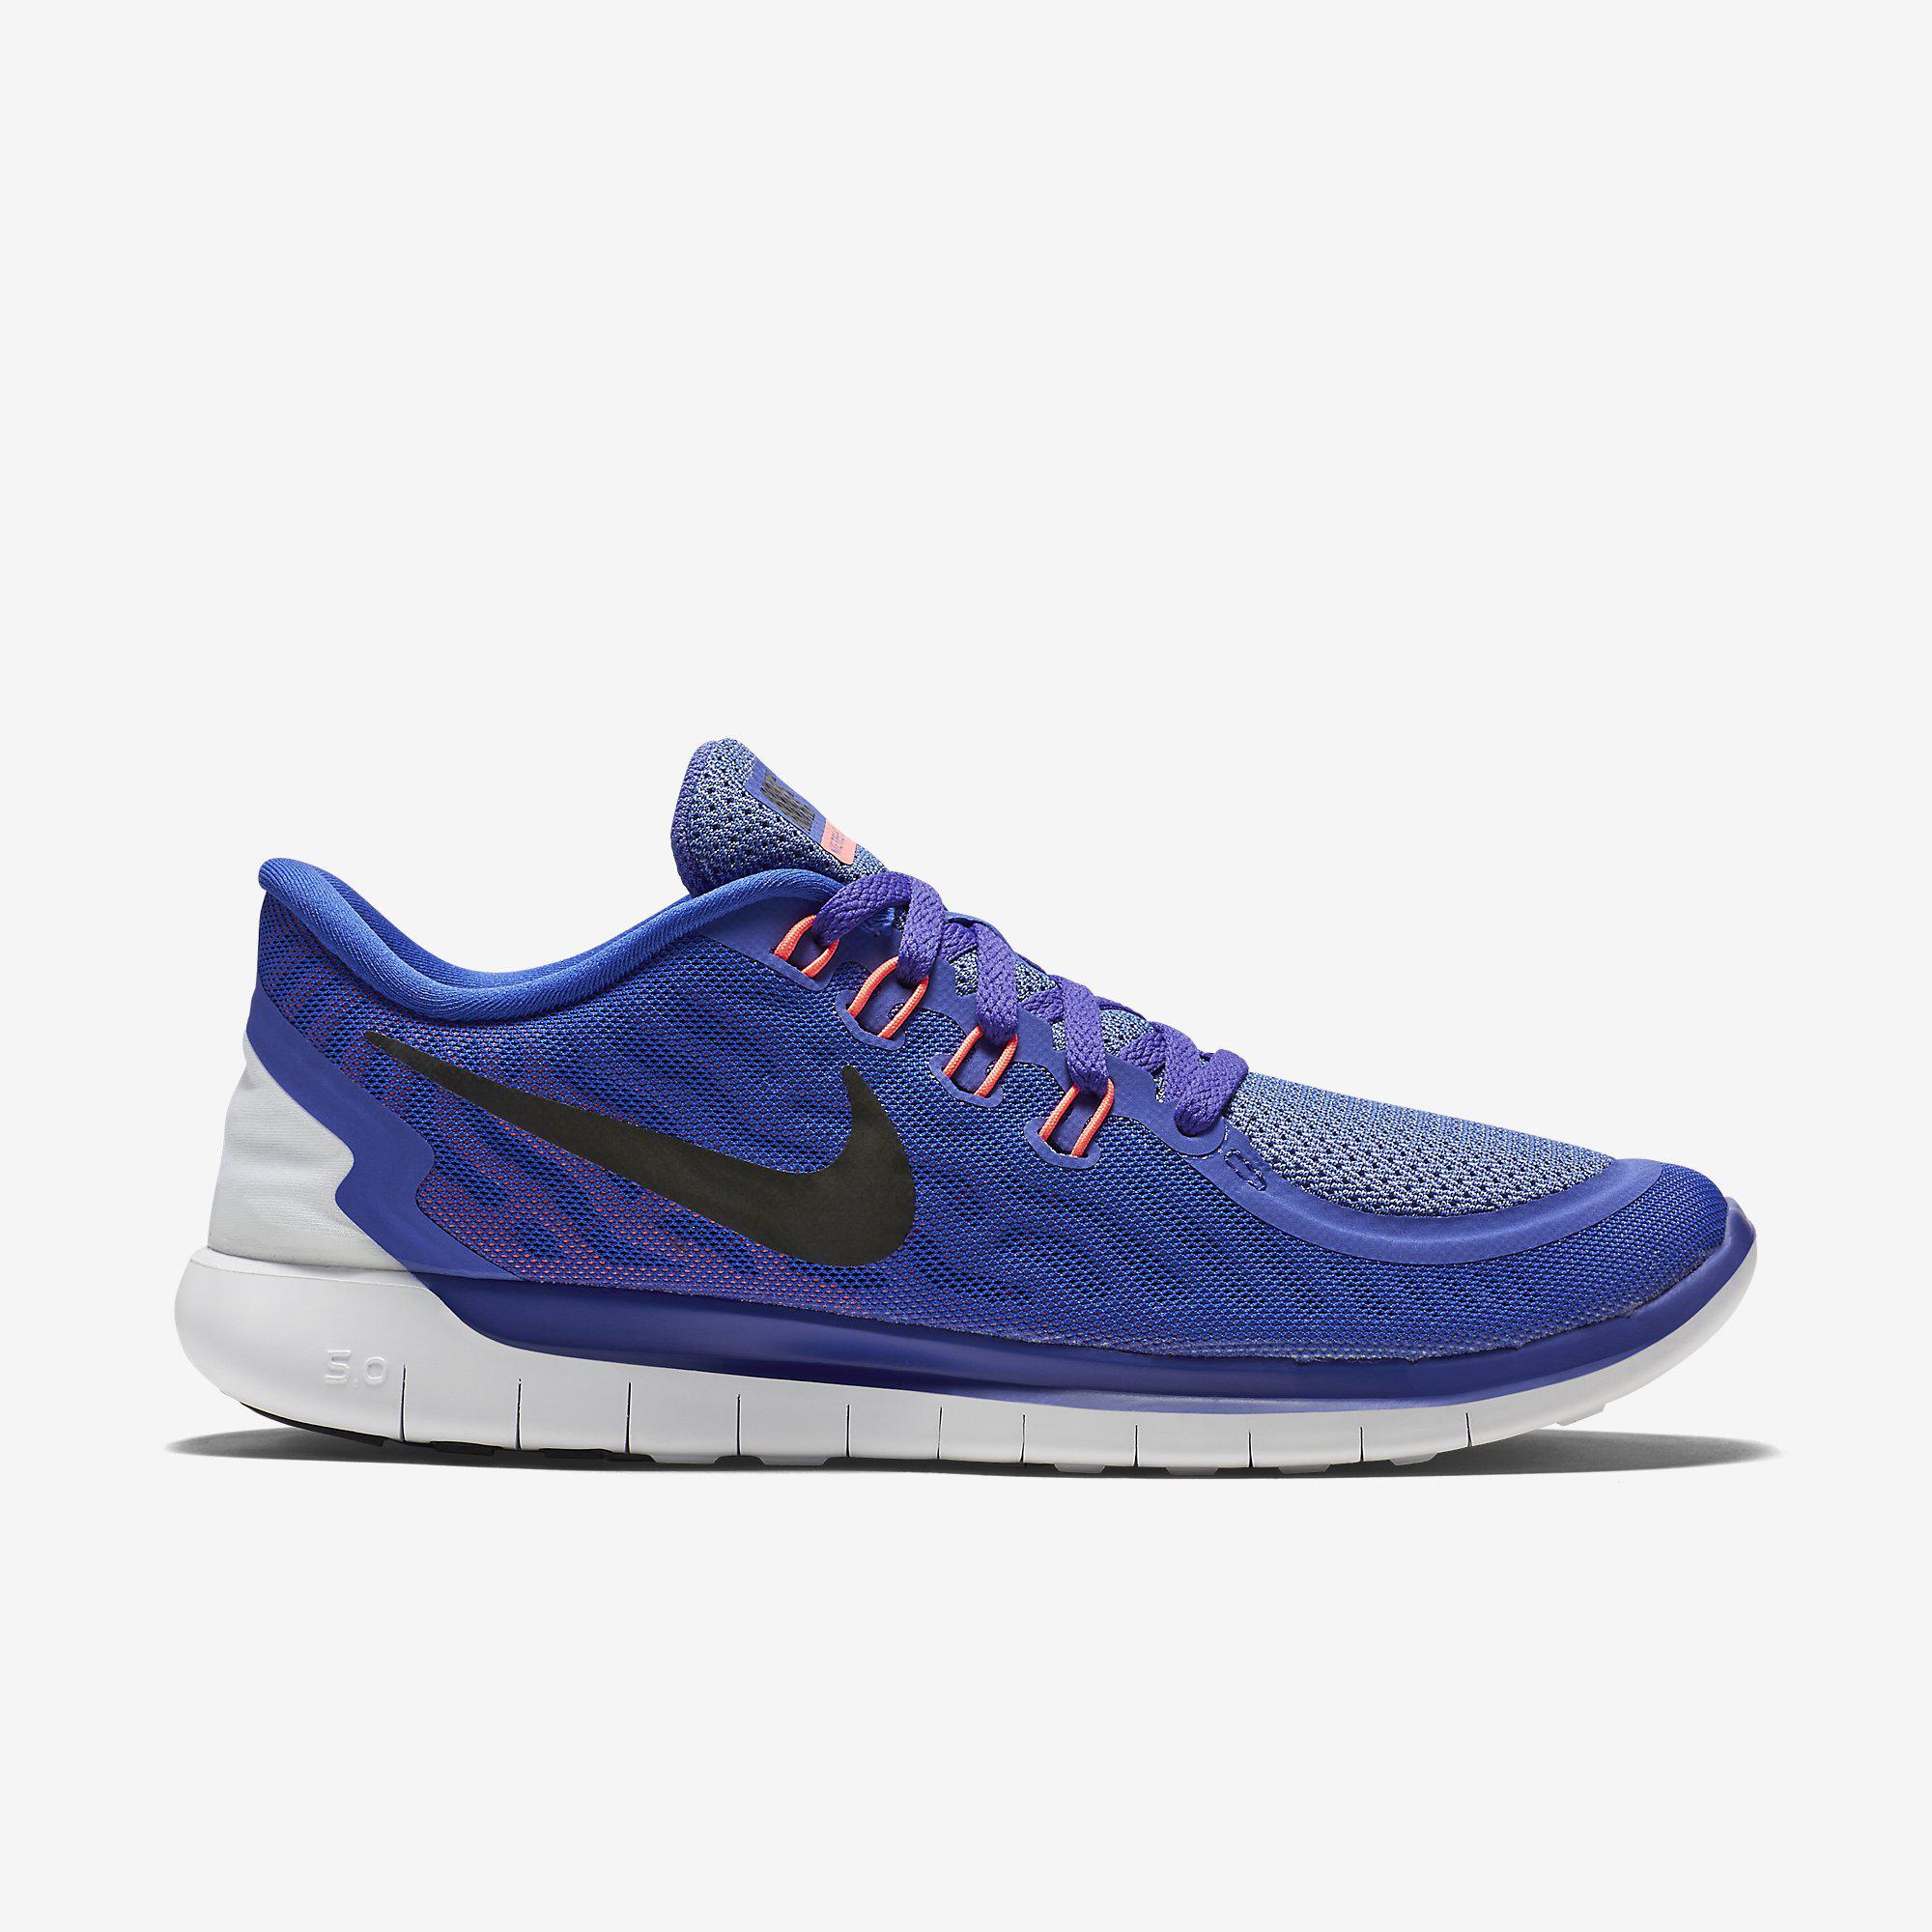 Nike Womens Free 5.0+ Running Shoes - Persian Violet - 0